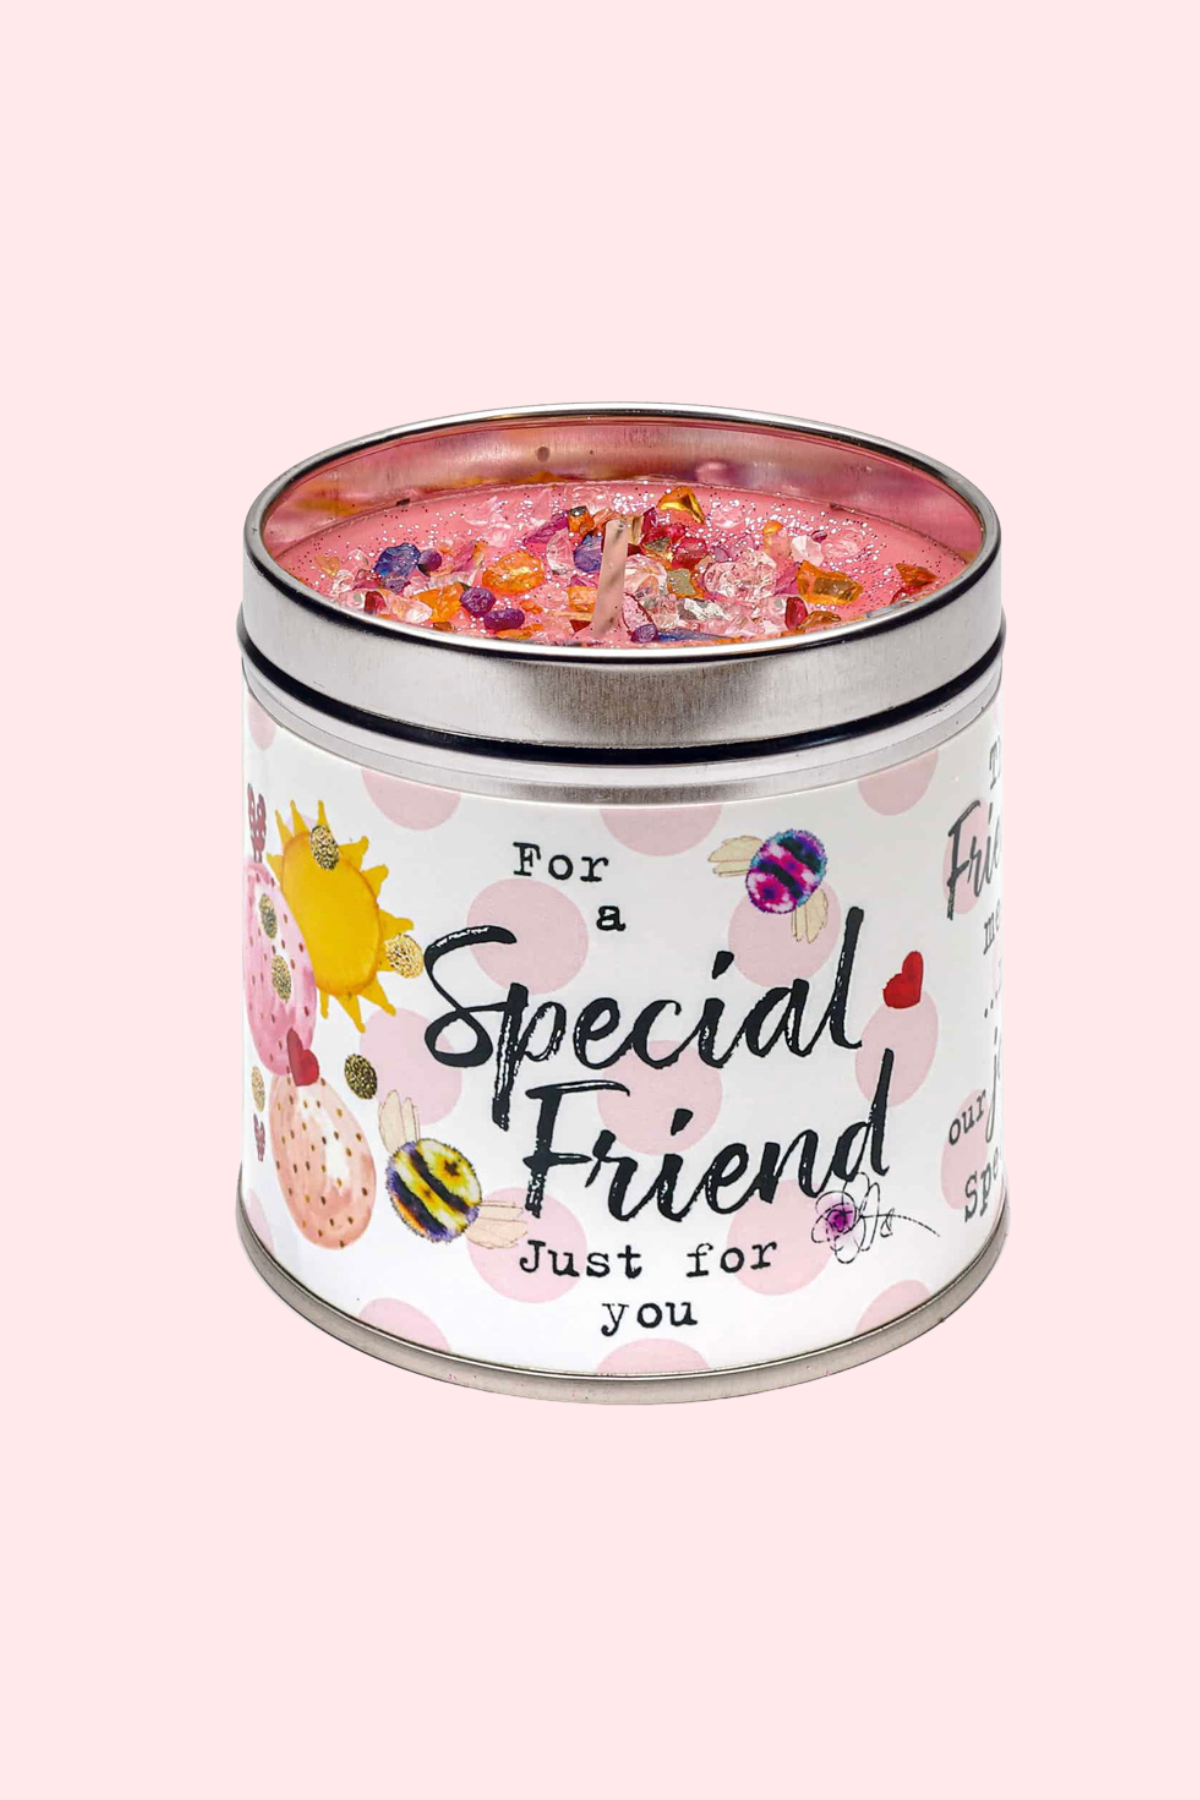 Special Friend Candle